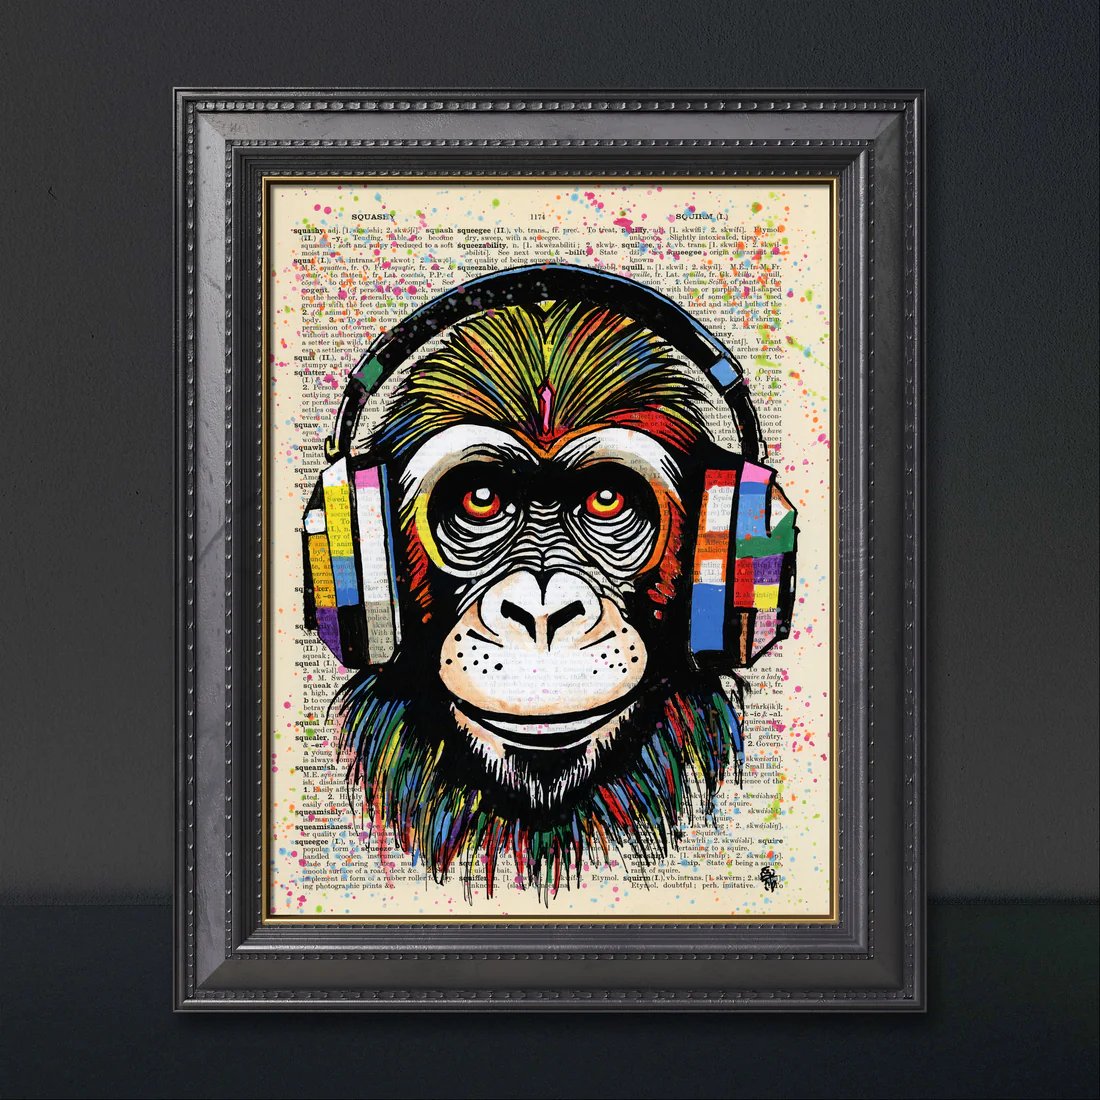 'Monkey Business' is an artwork created with acrylic paints and markers on an original upcycled dictionary page.” #art #giftideas #decor #funnyanimal artcursor.com/products/monke…